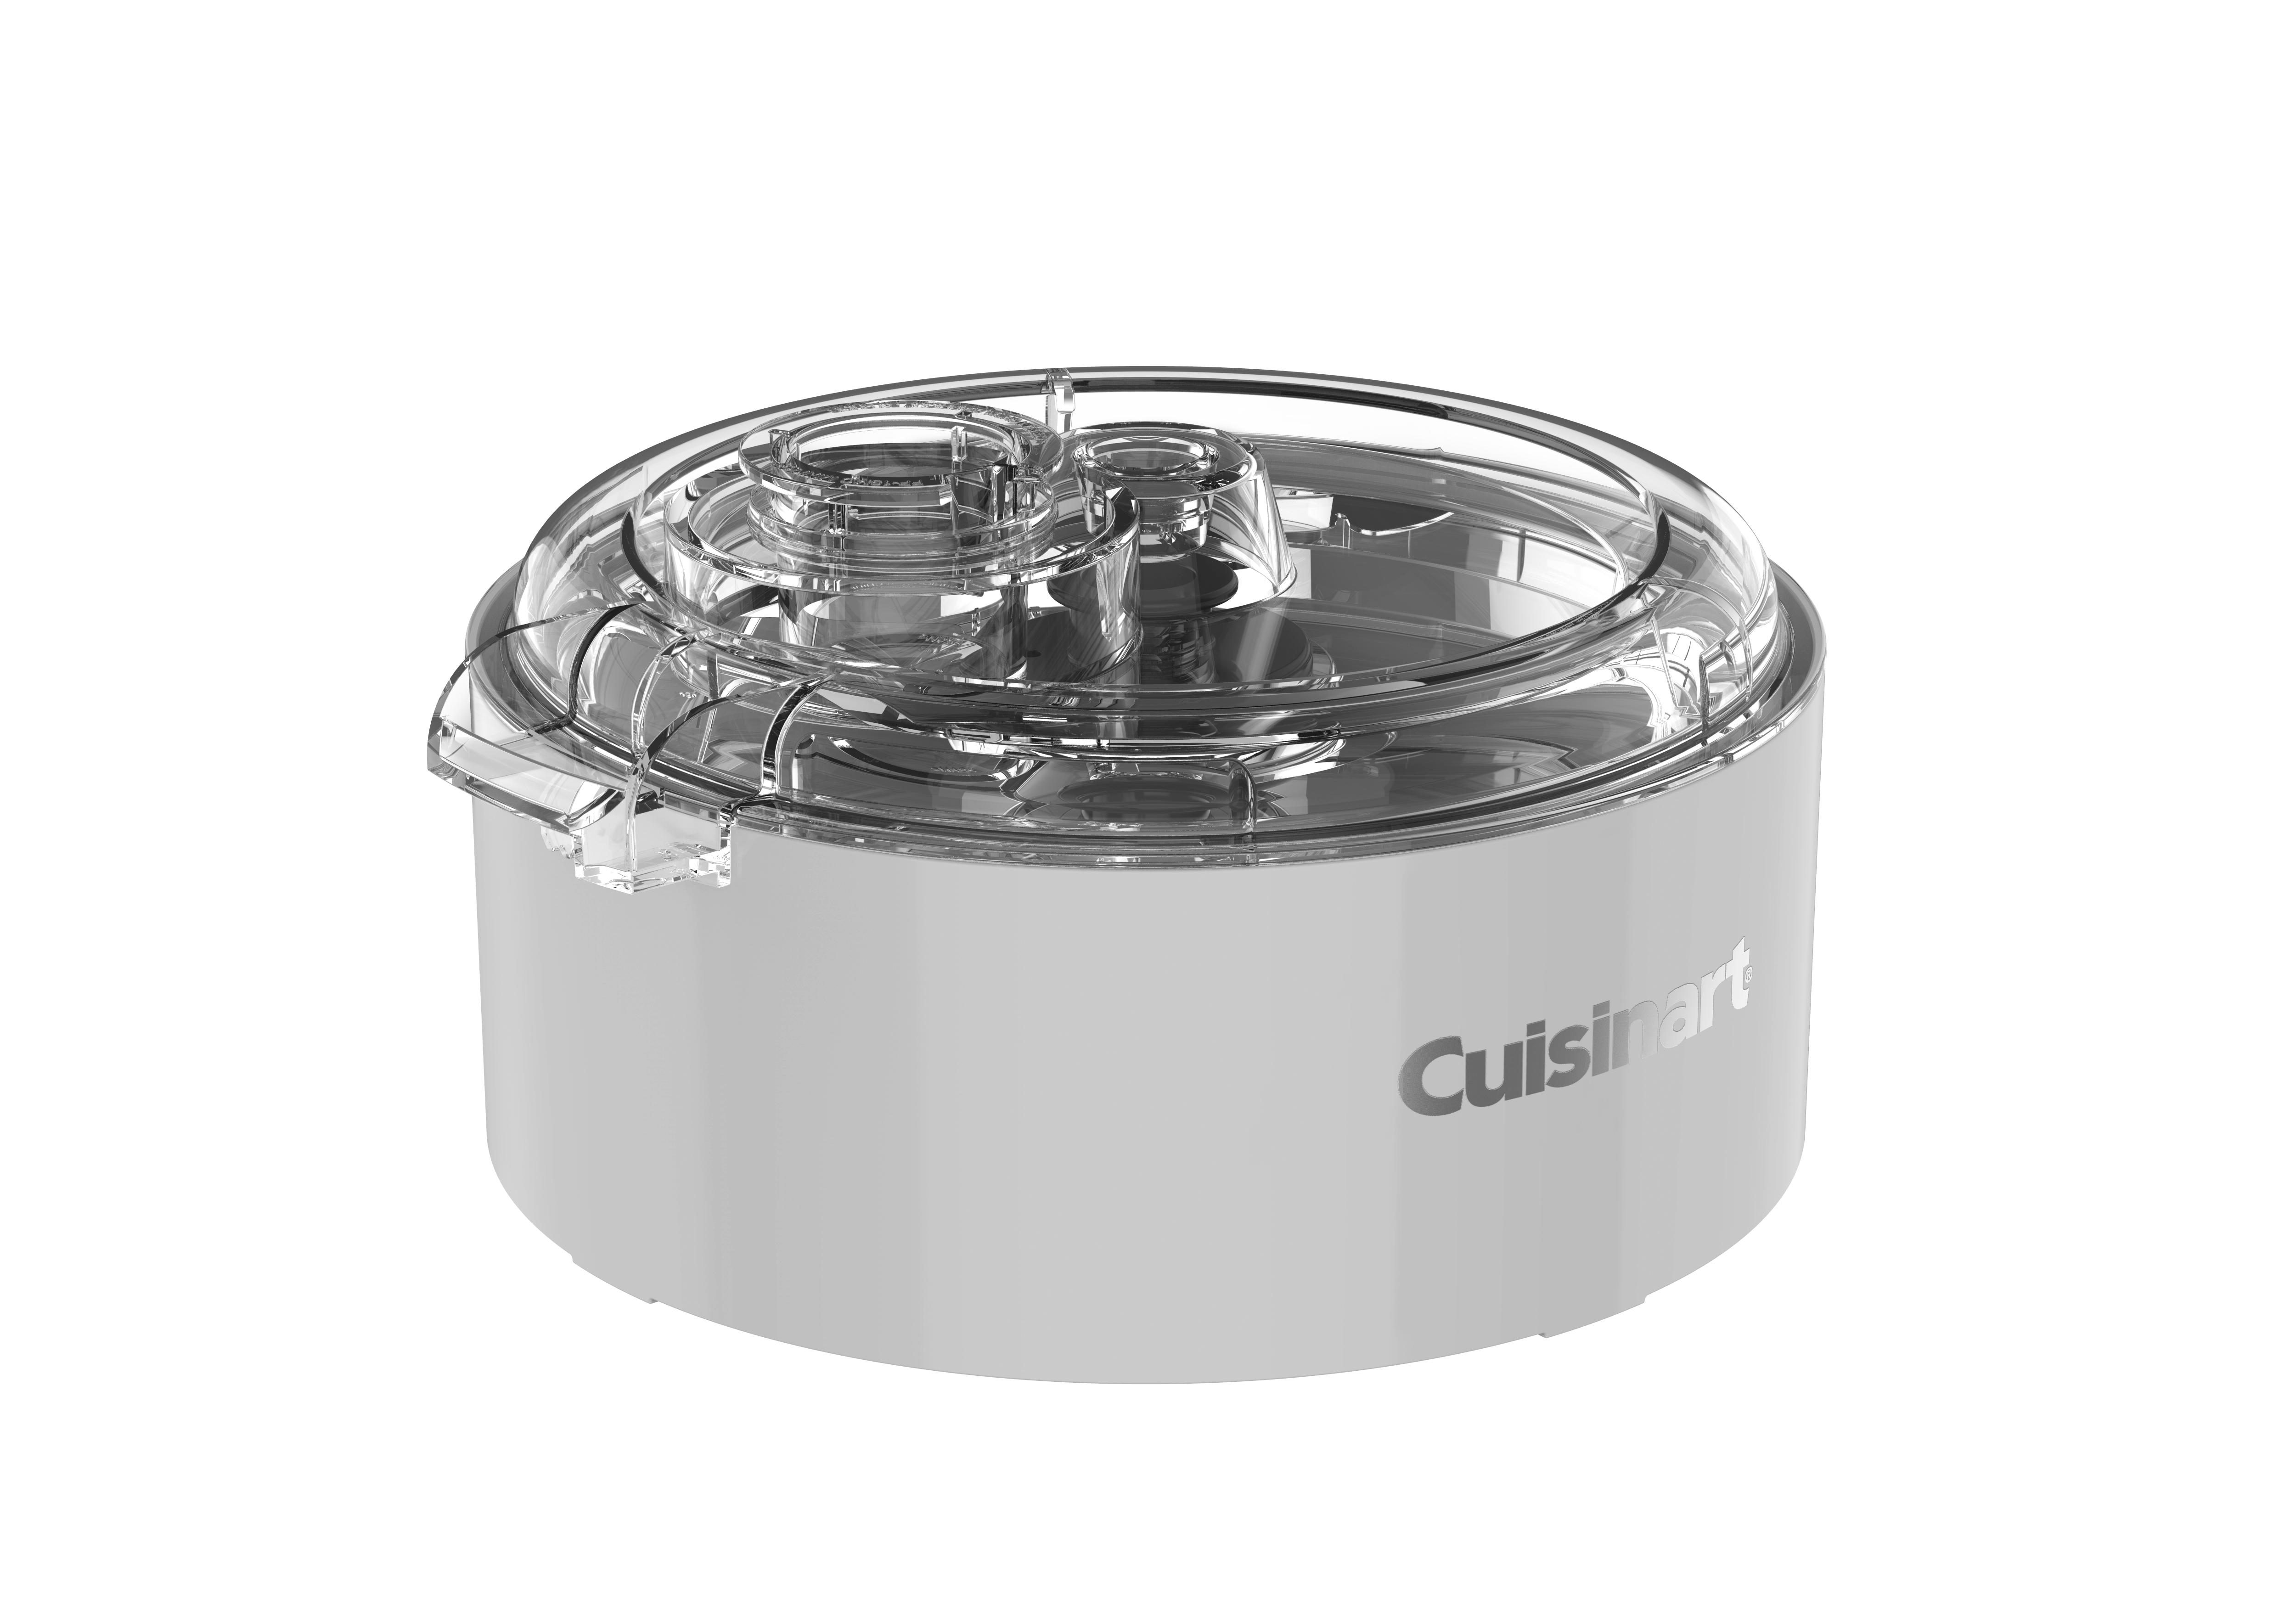 https://www.cuisinart.com/globalassets/cuisinart-image-feed/fp-dcp1/fp-dcp1.png